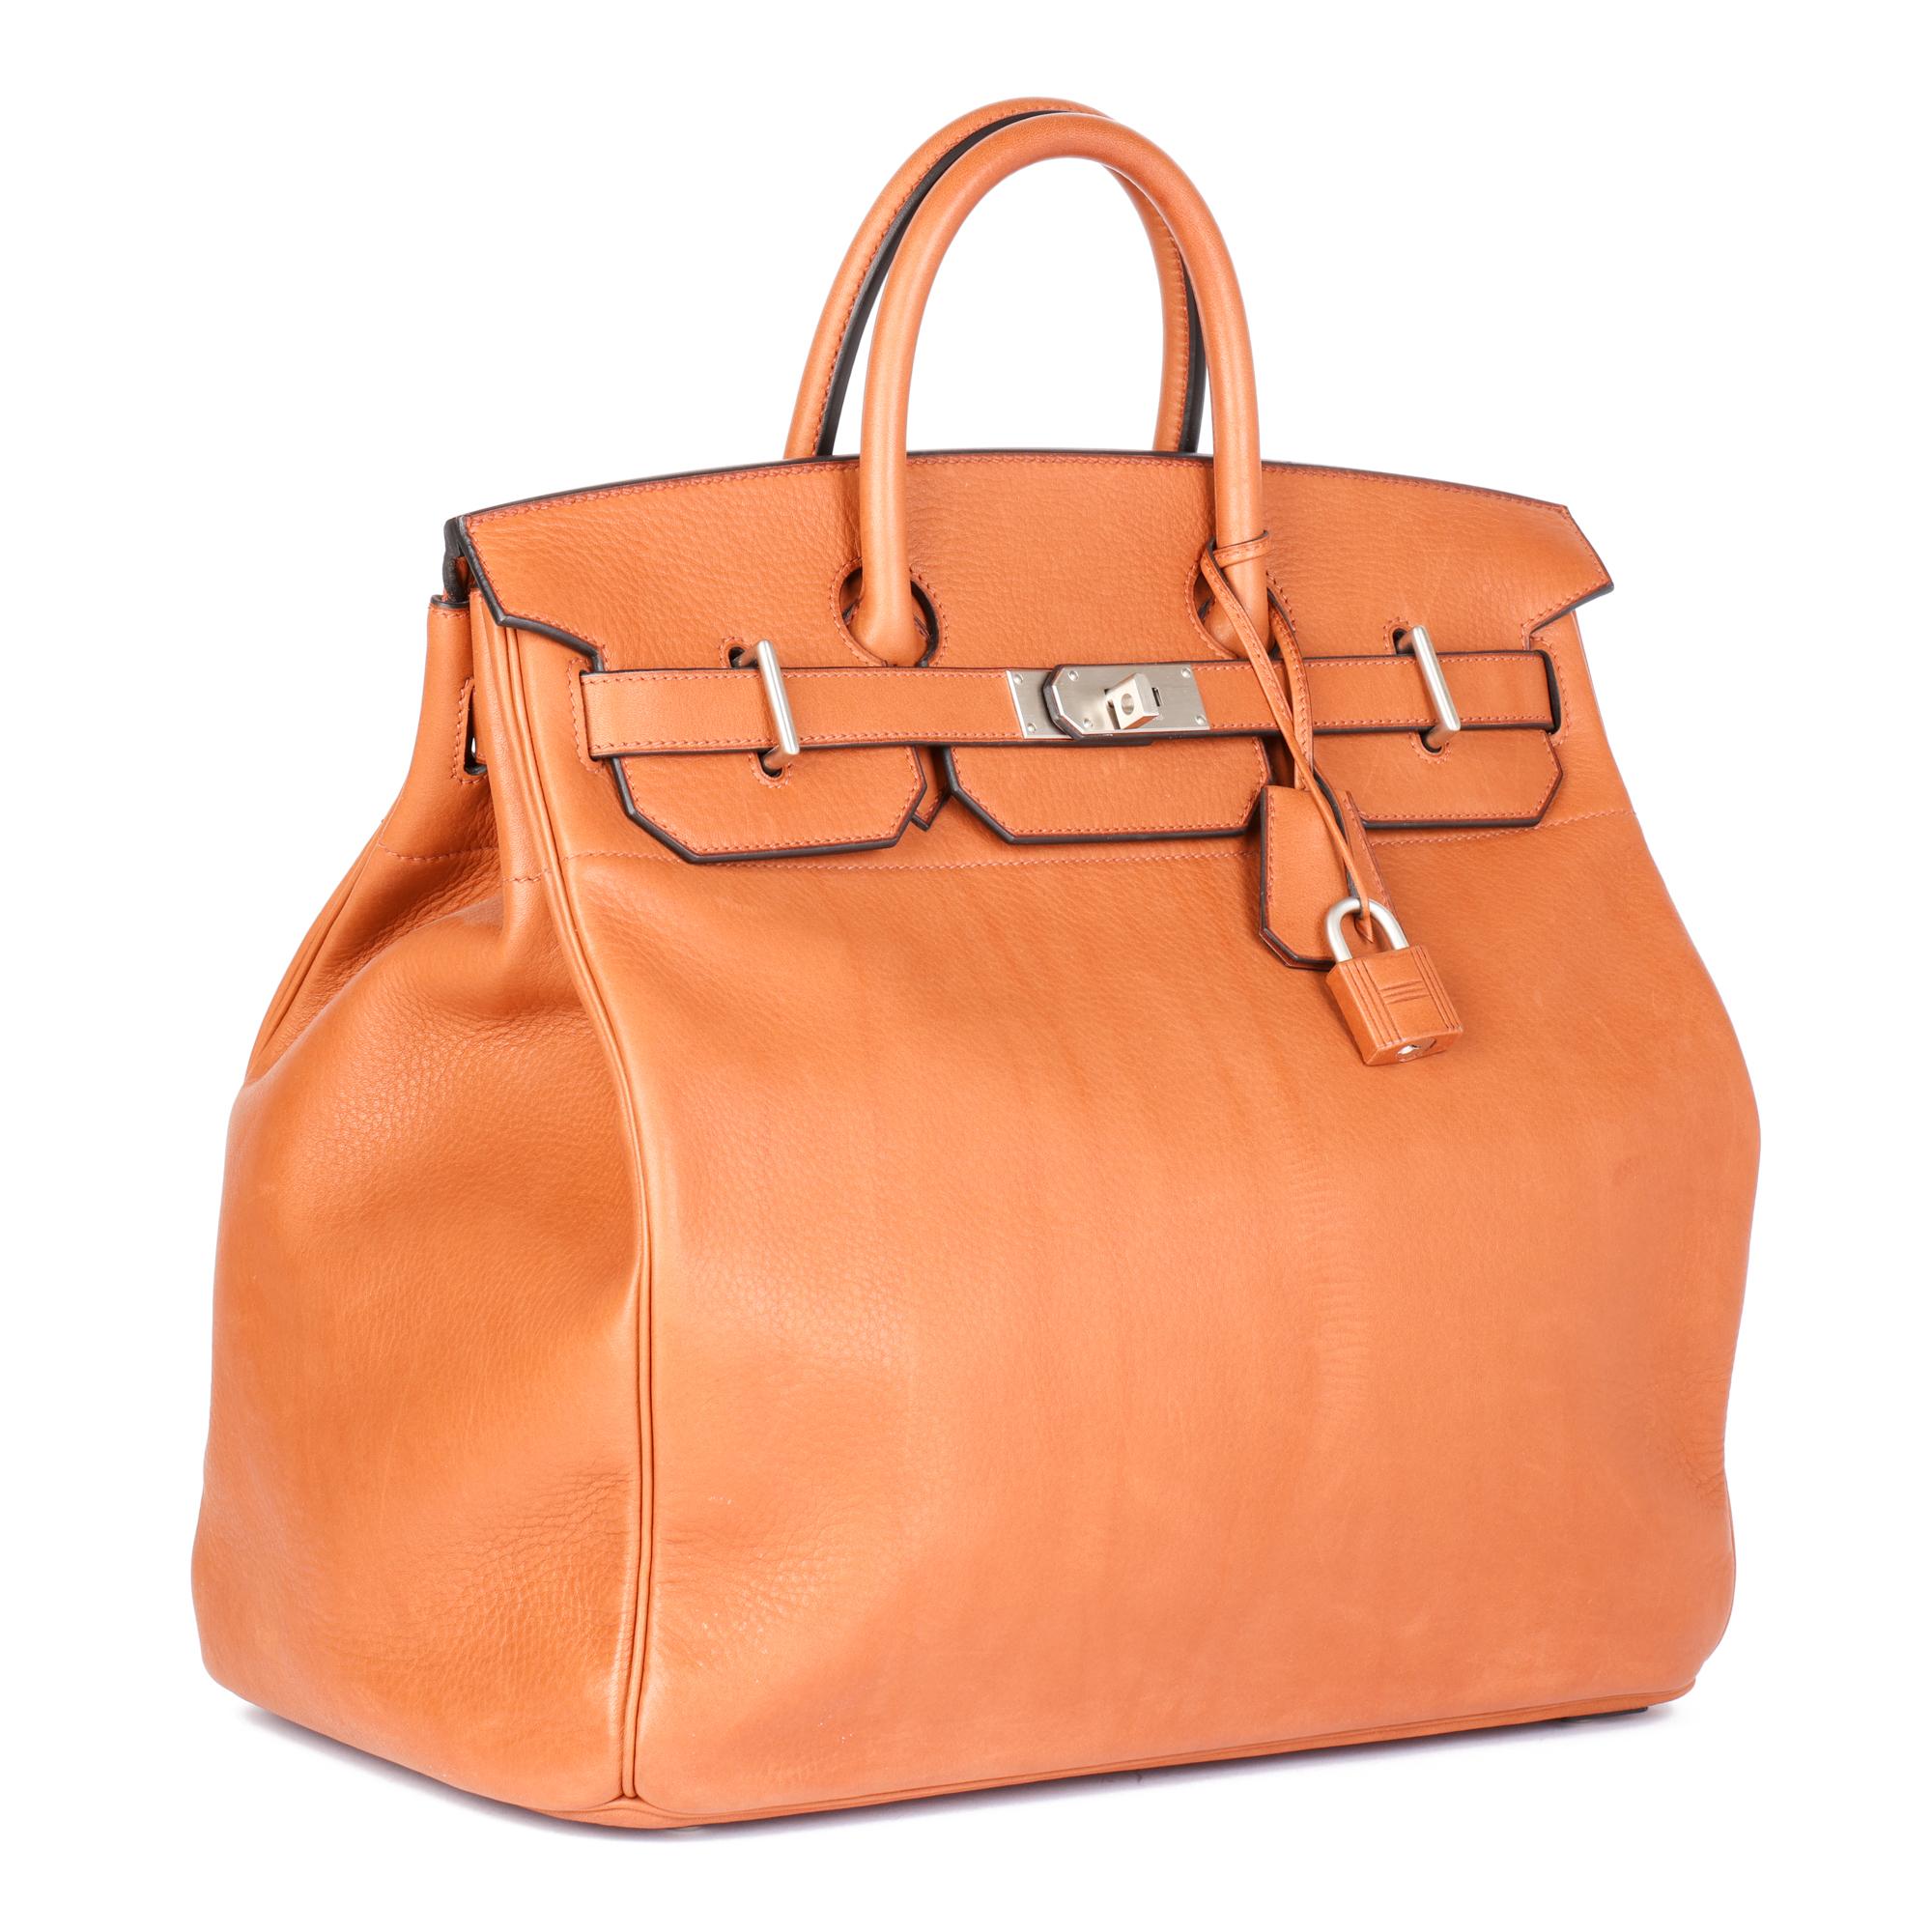 HERMÈS
Cuivre Taurillon Saddle Leather Birkin 40cm HAC

Serial Number: C
Age (Circa): 2018
Accompanied By: Hermès Dust Bag, Padlock, Keys, Clochette, Protective Felt
Authenticity Details: Date Stamp (Made in France)
Gender: Ladies
Type: